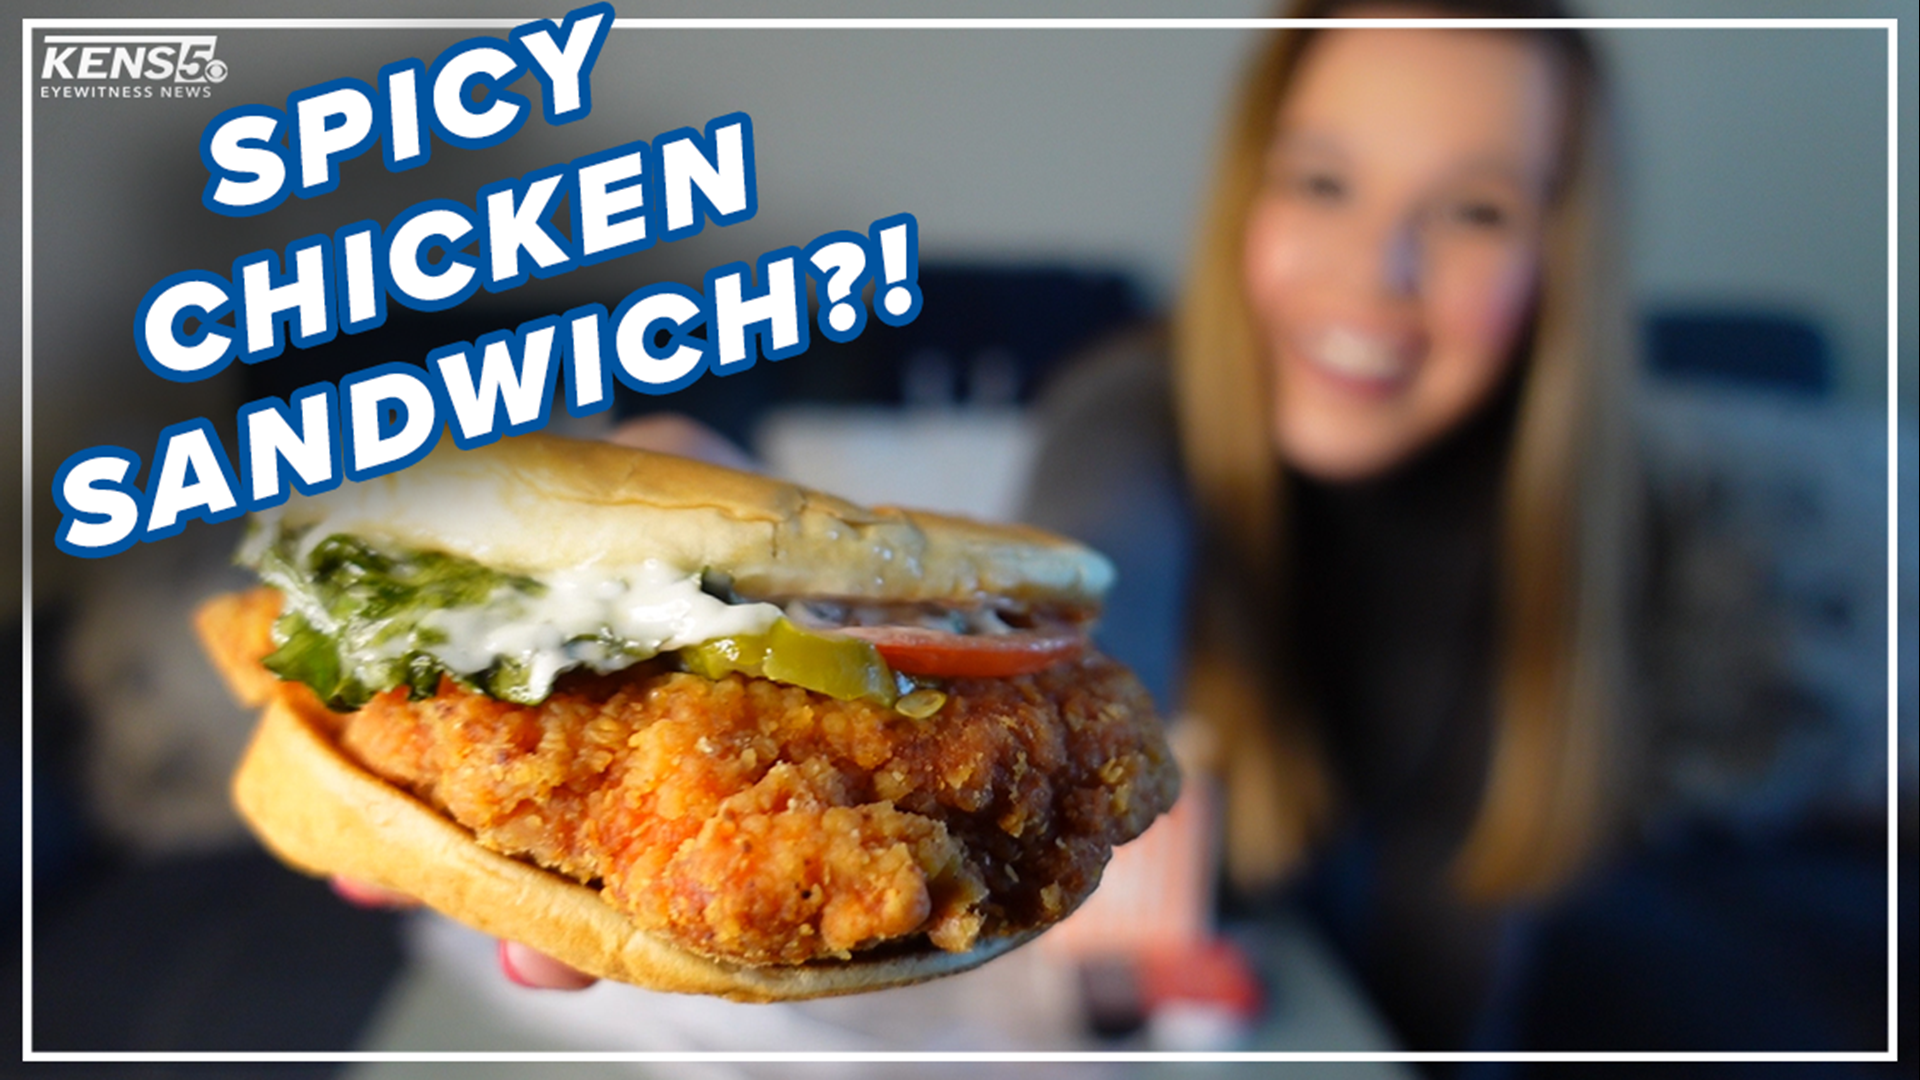 The spicy chicken sandwich craze is still happening. And now, Whataburger is on the ballot for the best sandwich. Digital reporter Lexi Hazlett tries it out.